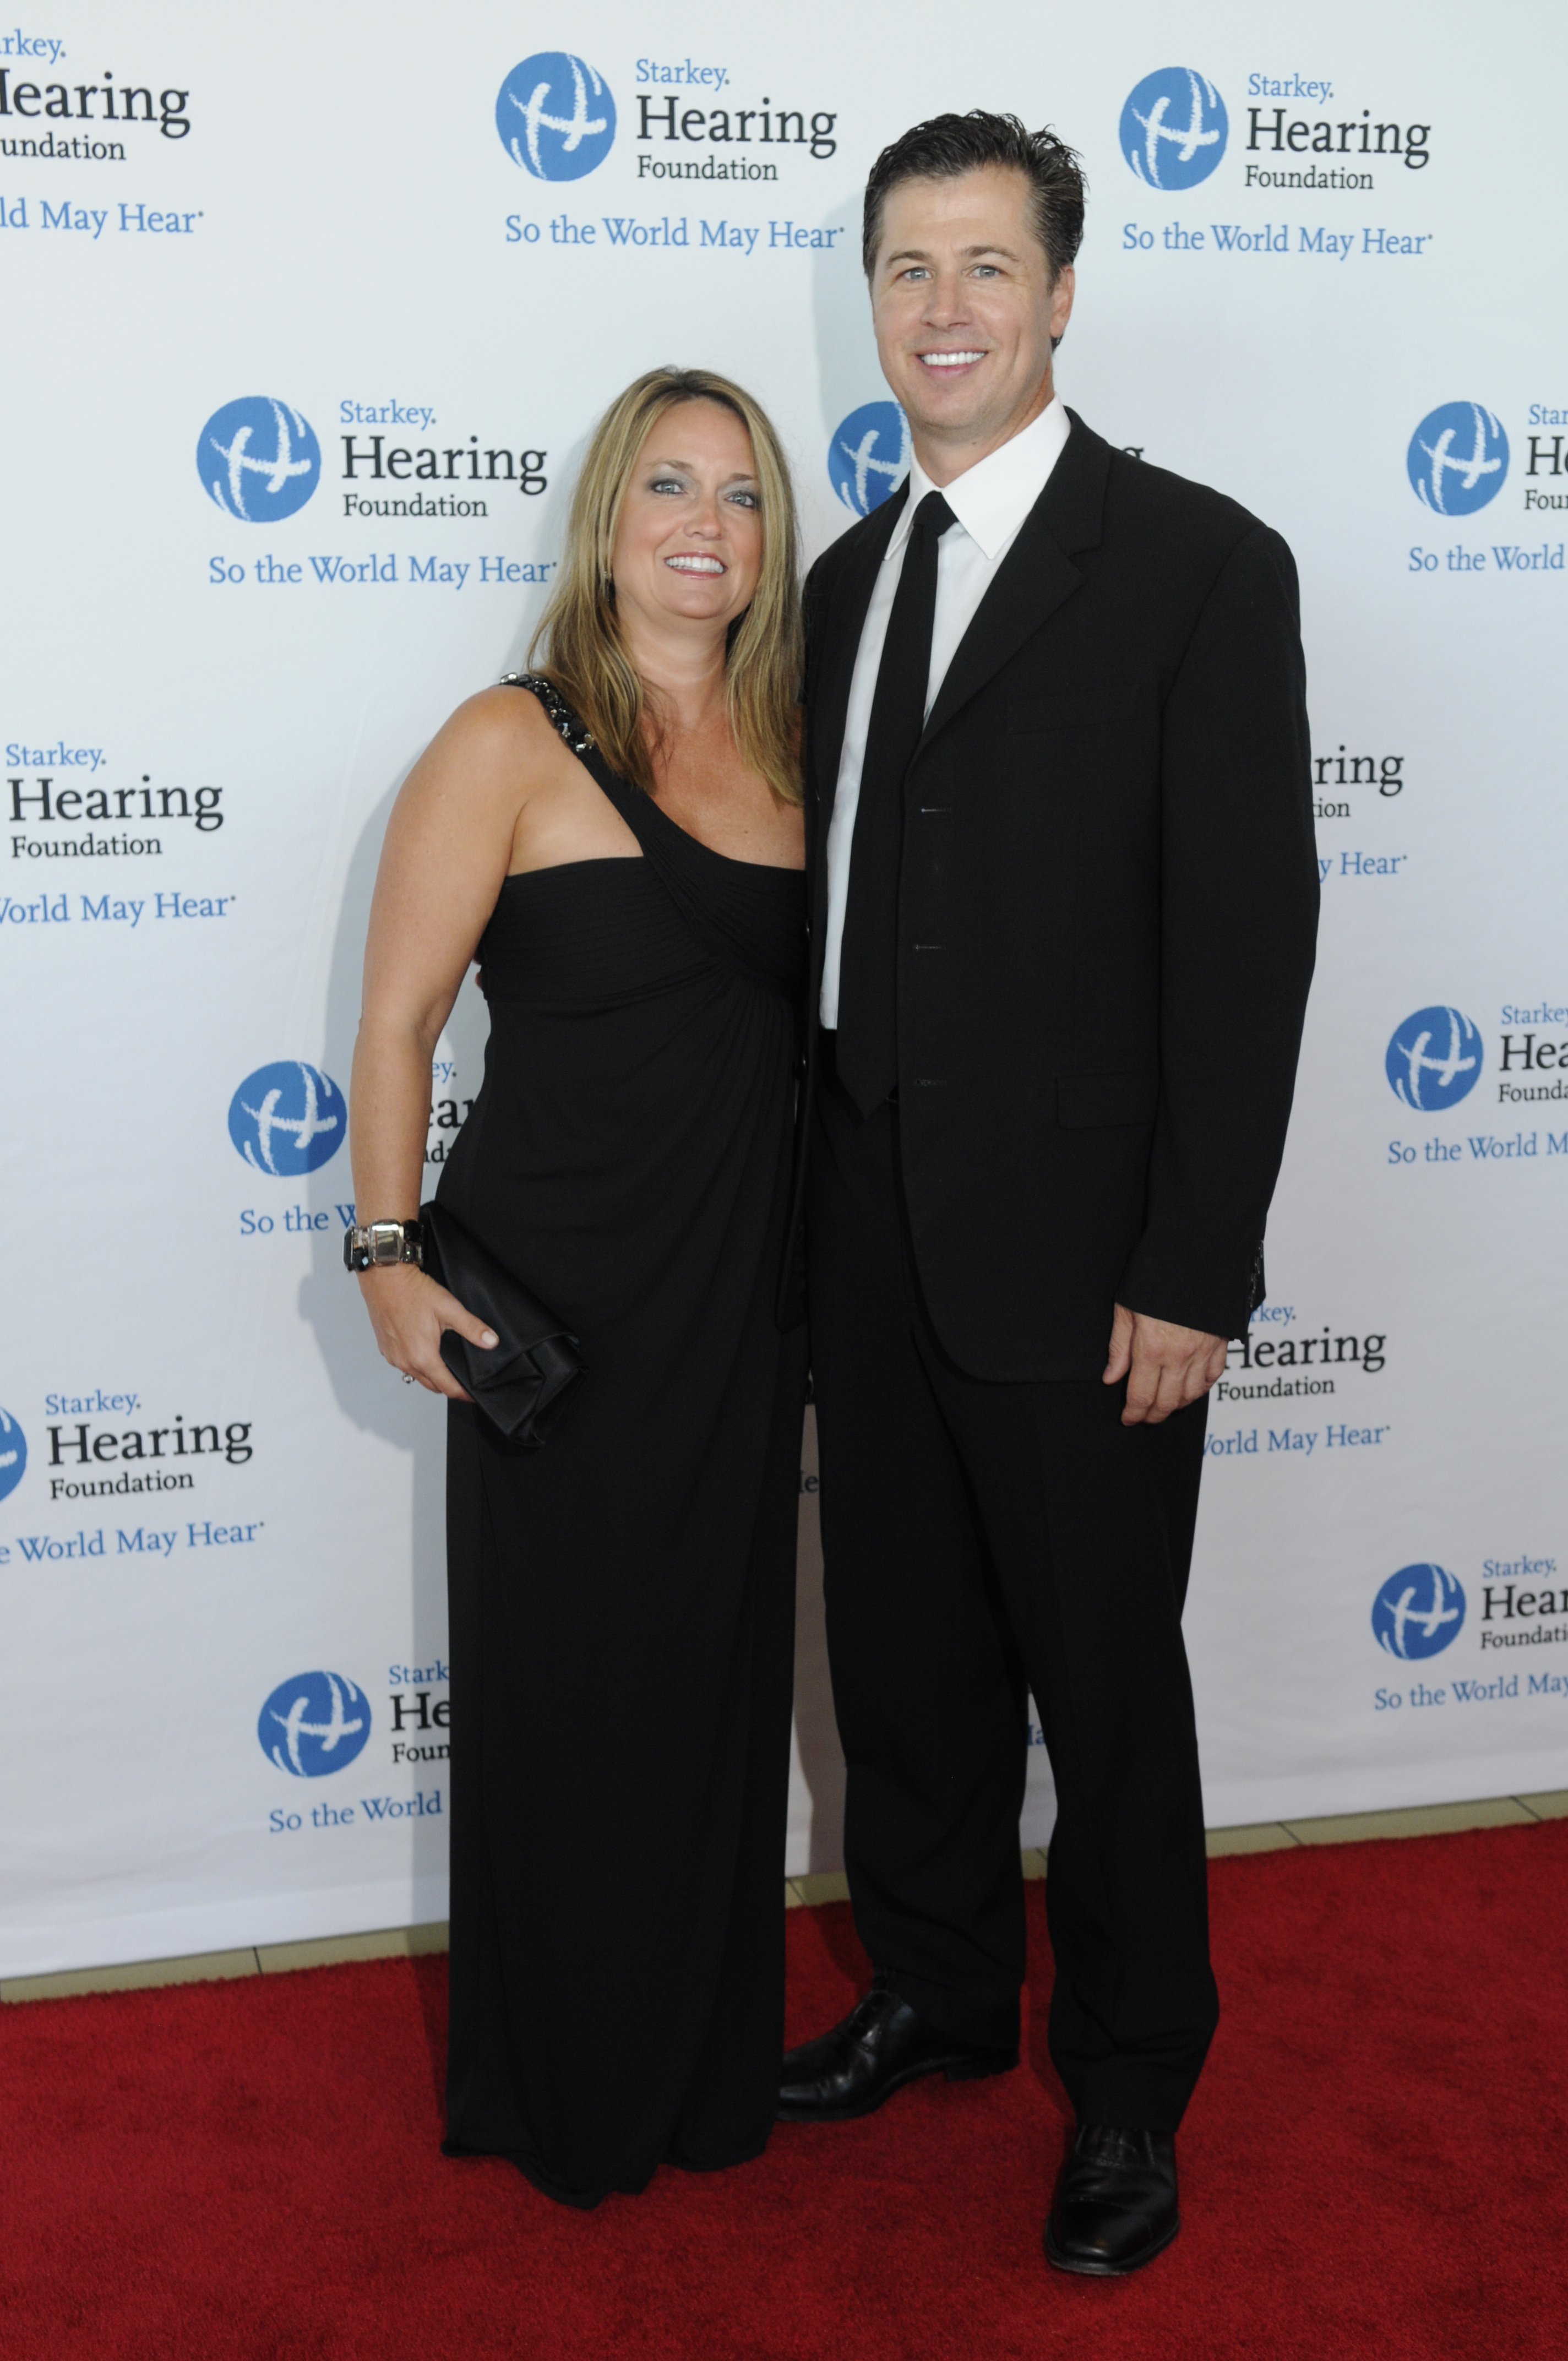 Doug Pitt and his wife Lisa at the So The World May Hear Gala in Minnesota | Source: Getty Images 